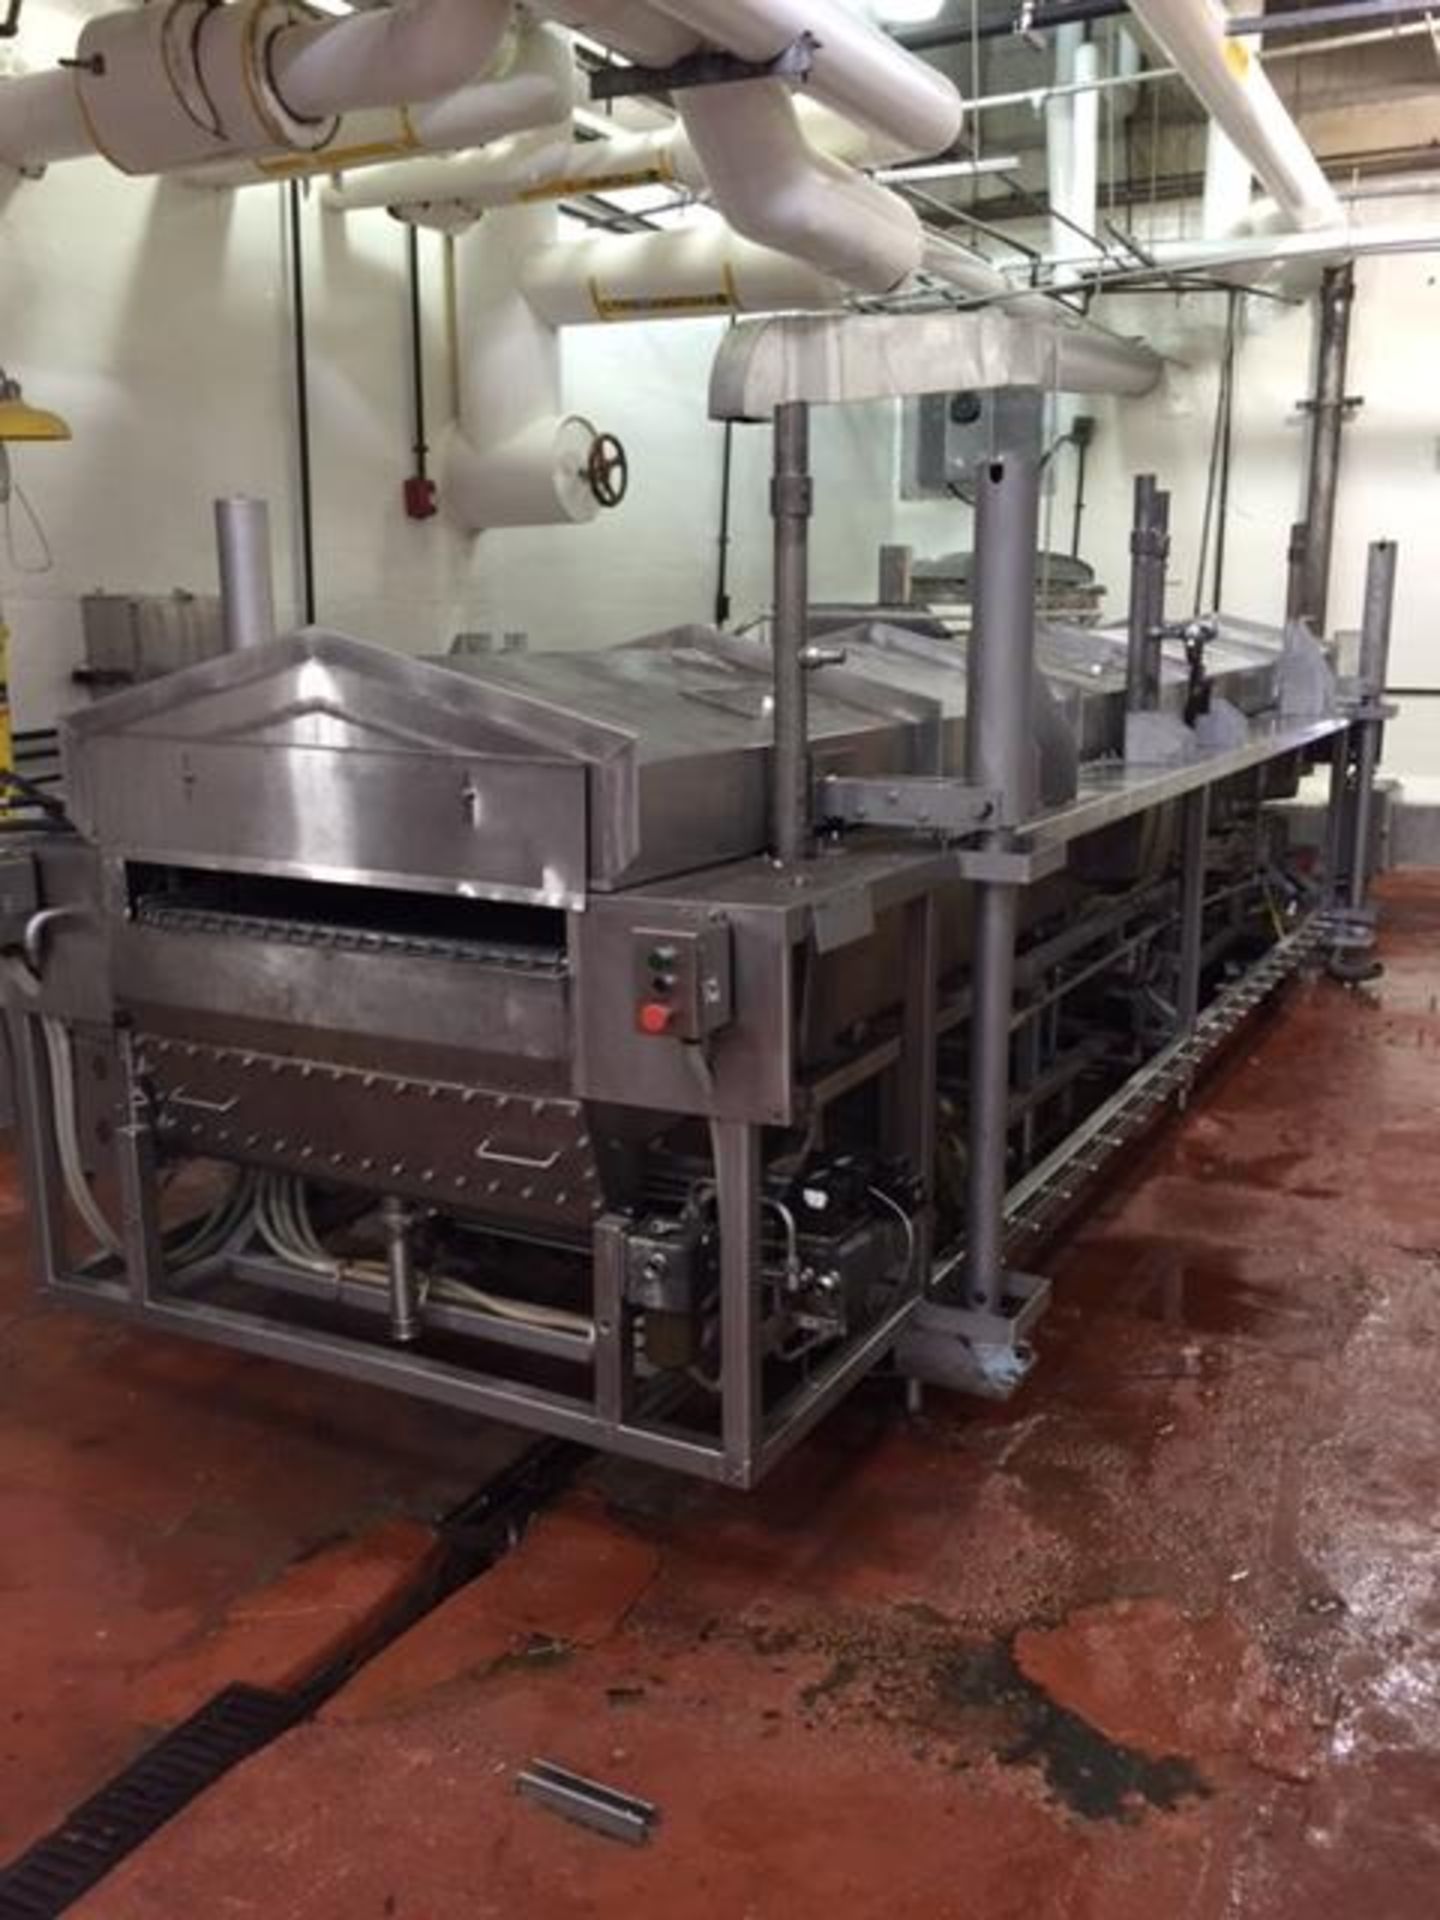 Stein Model #3419 TFFII Thermal Fin Fryer with Control Panel, Serial #434 - Image 4 of 4